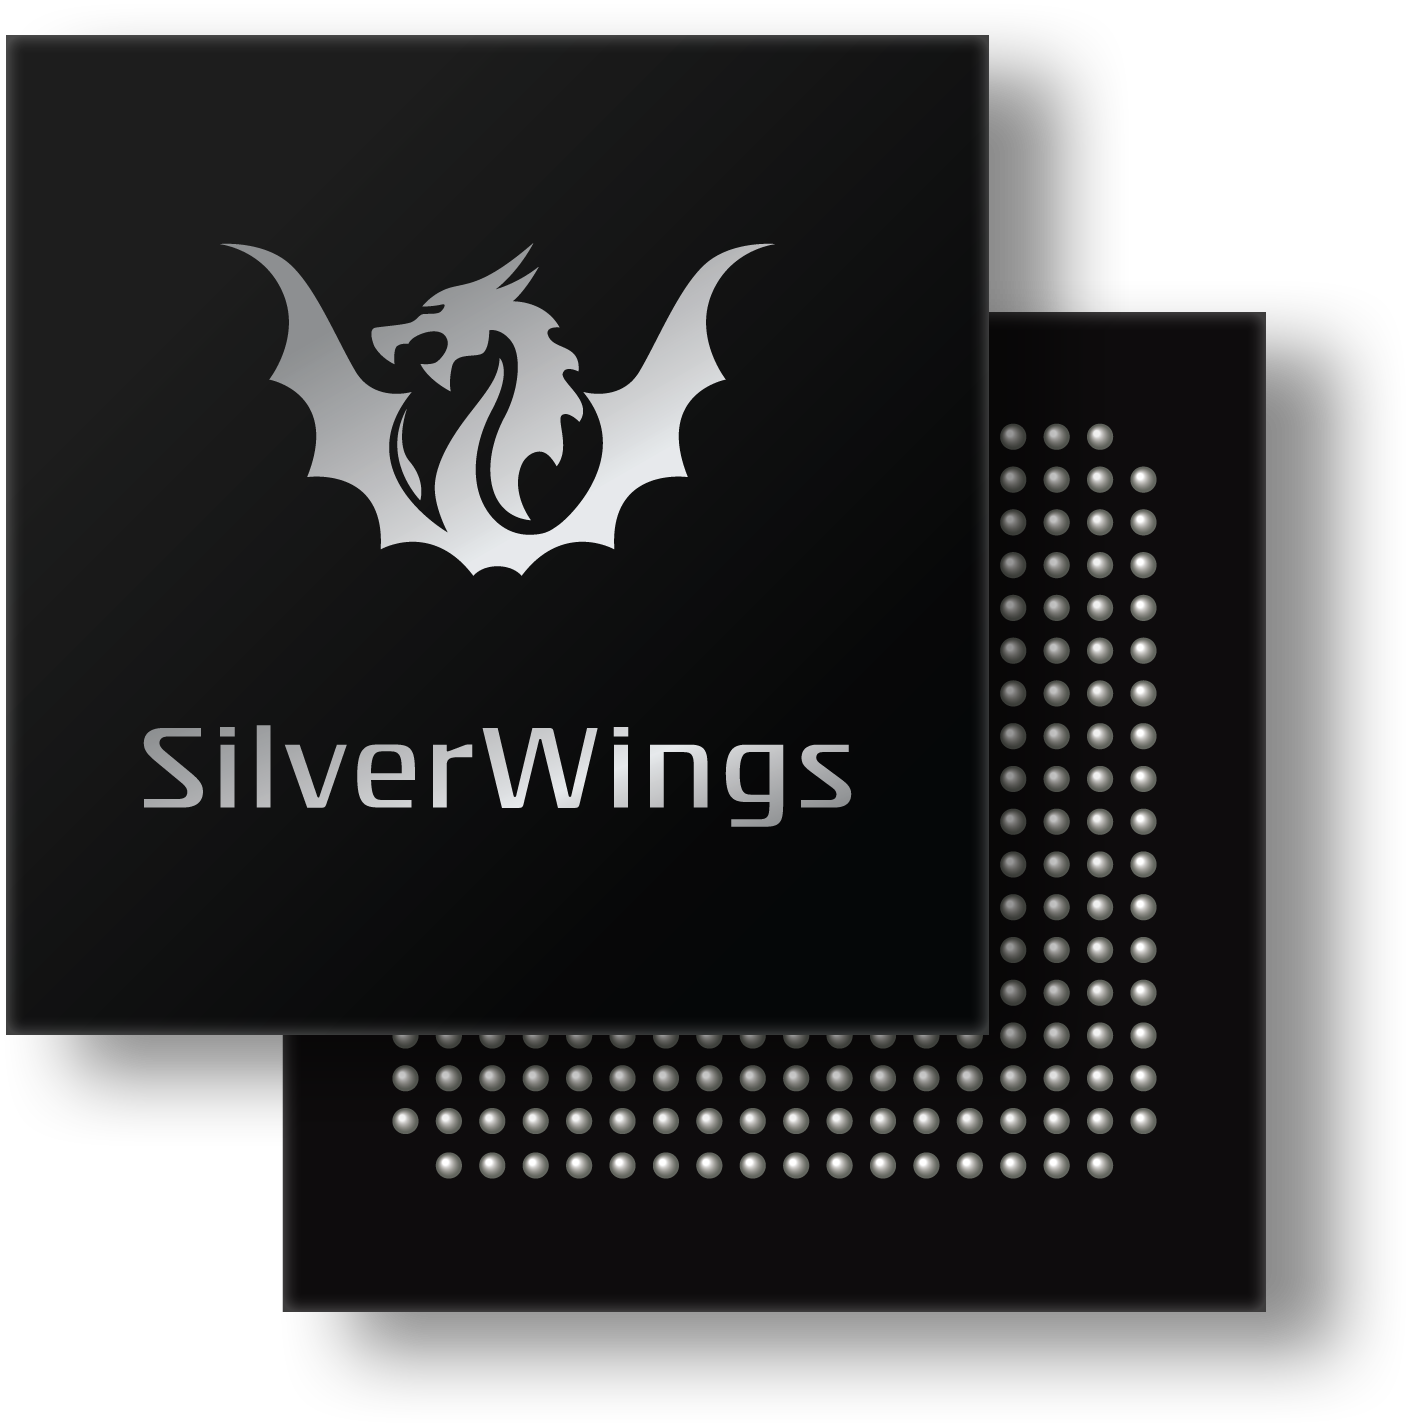 SilverWings: The World's Premier Low-Power All-in-One RF Transceiver